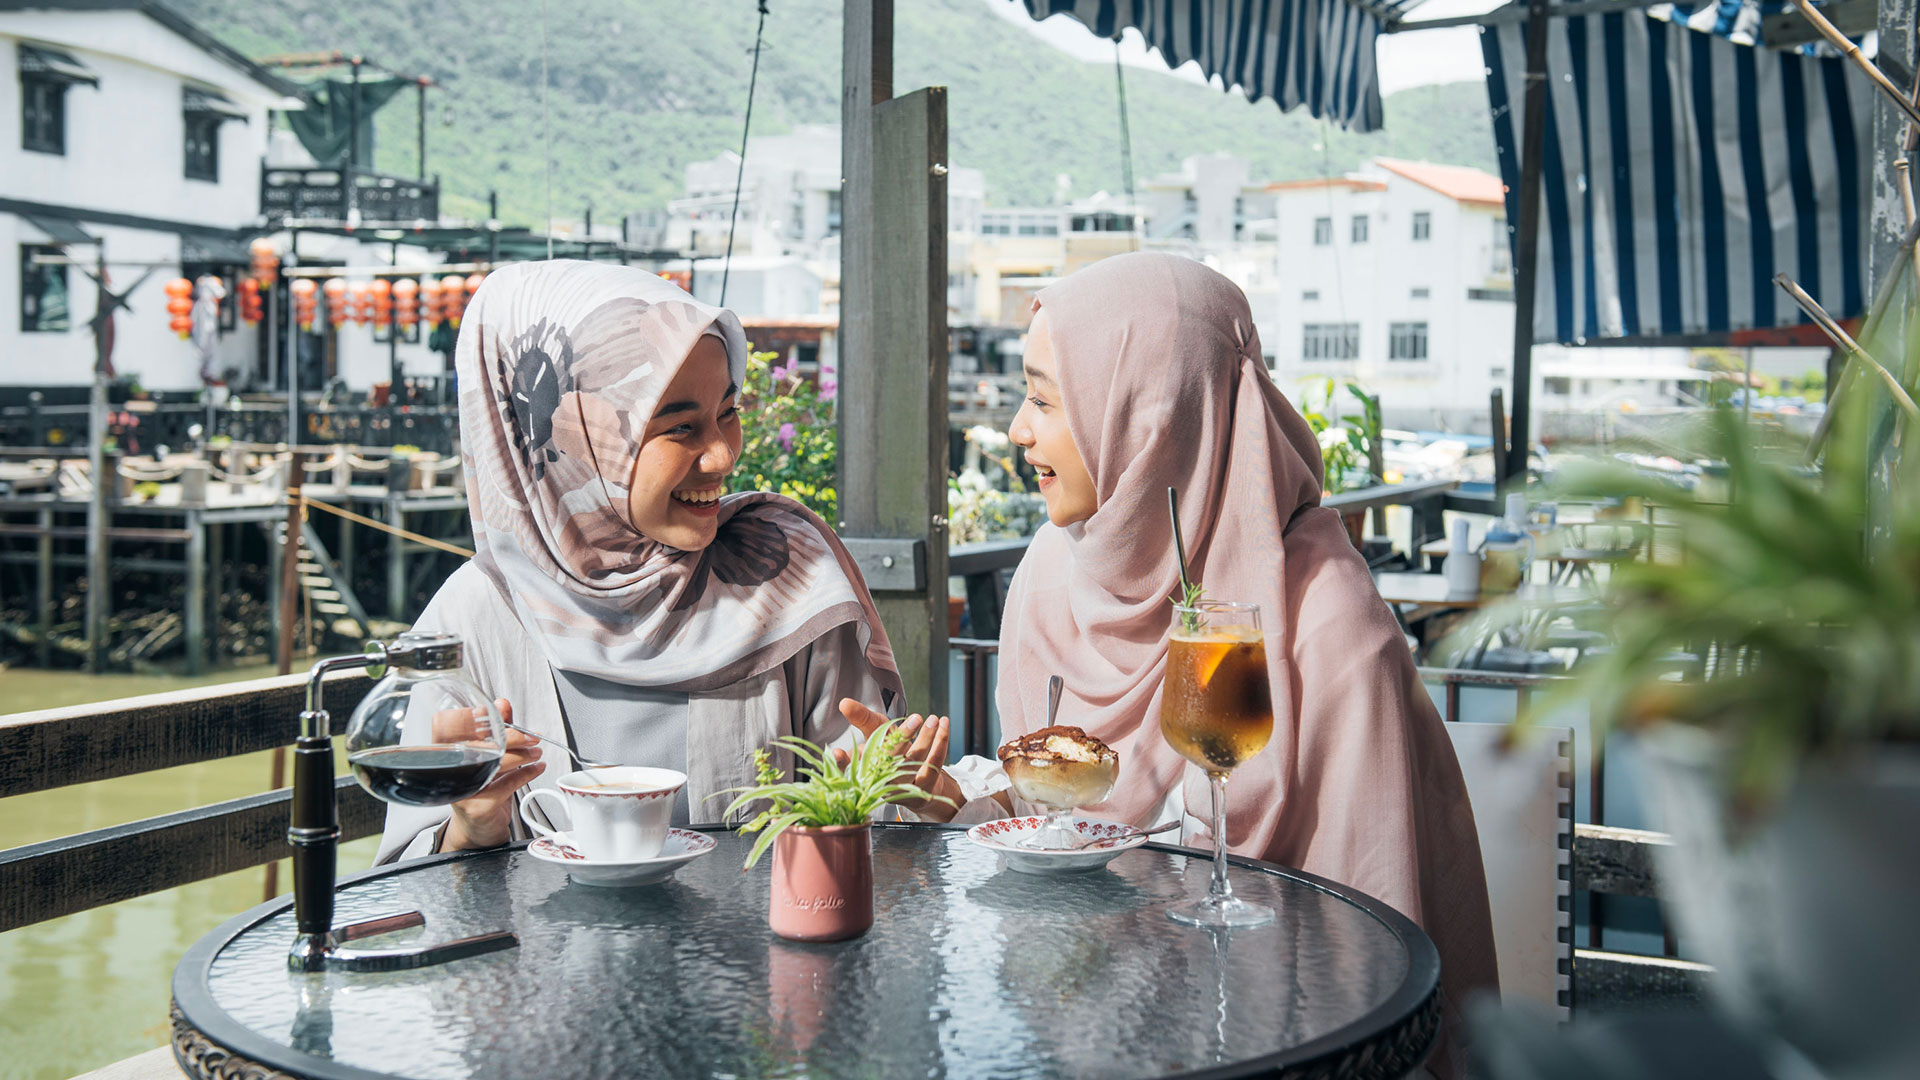 8 of the best halal food places in Hong Kong | Hong Kong Tourism Board